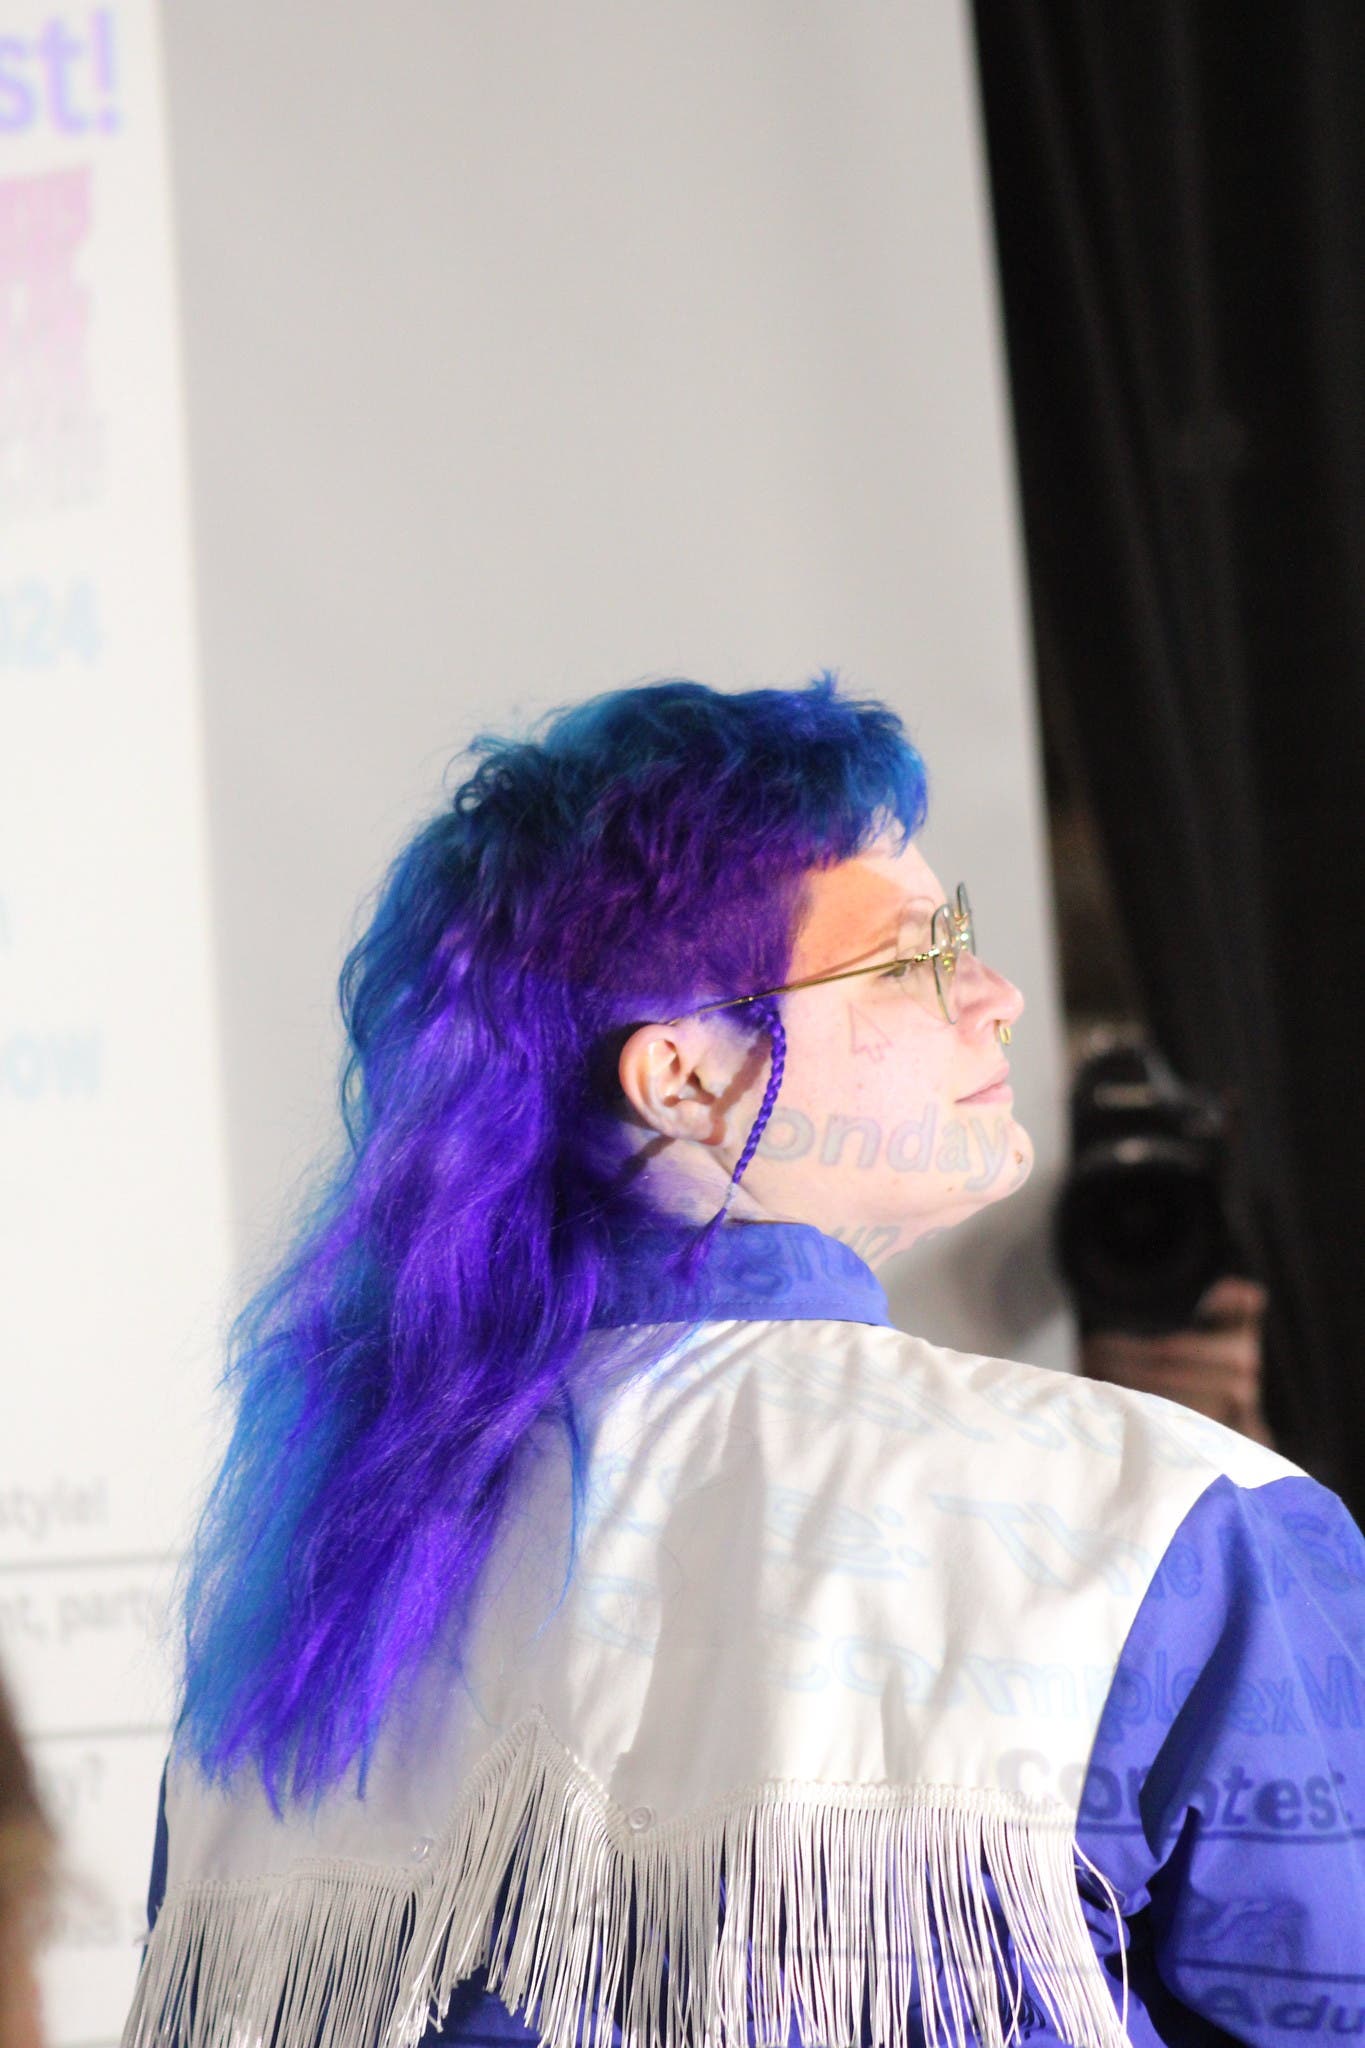 PHOTOS: ‘Best In Grow’ Mullet Wins at PA Farm Show Contest